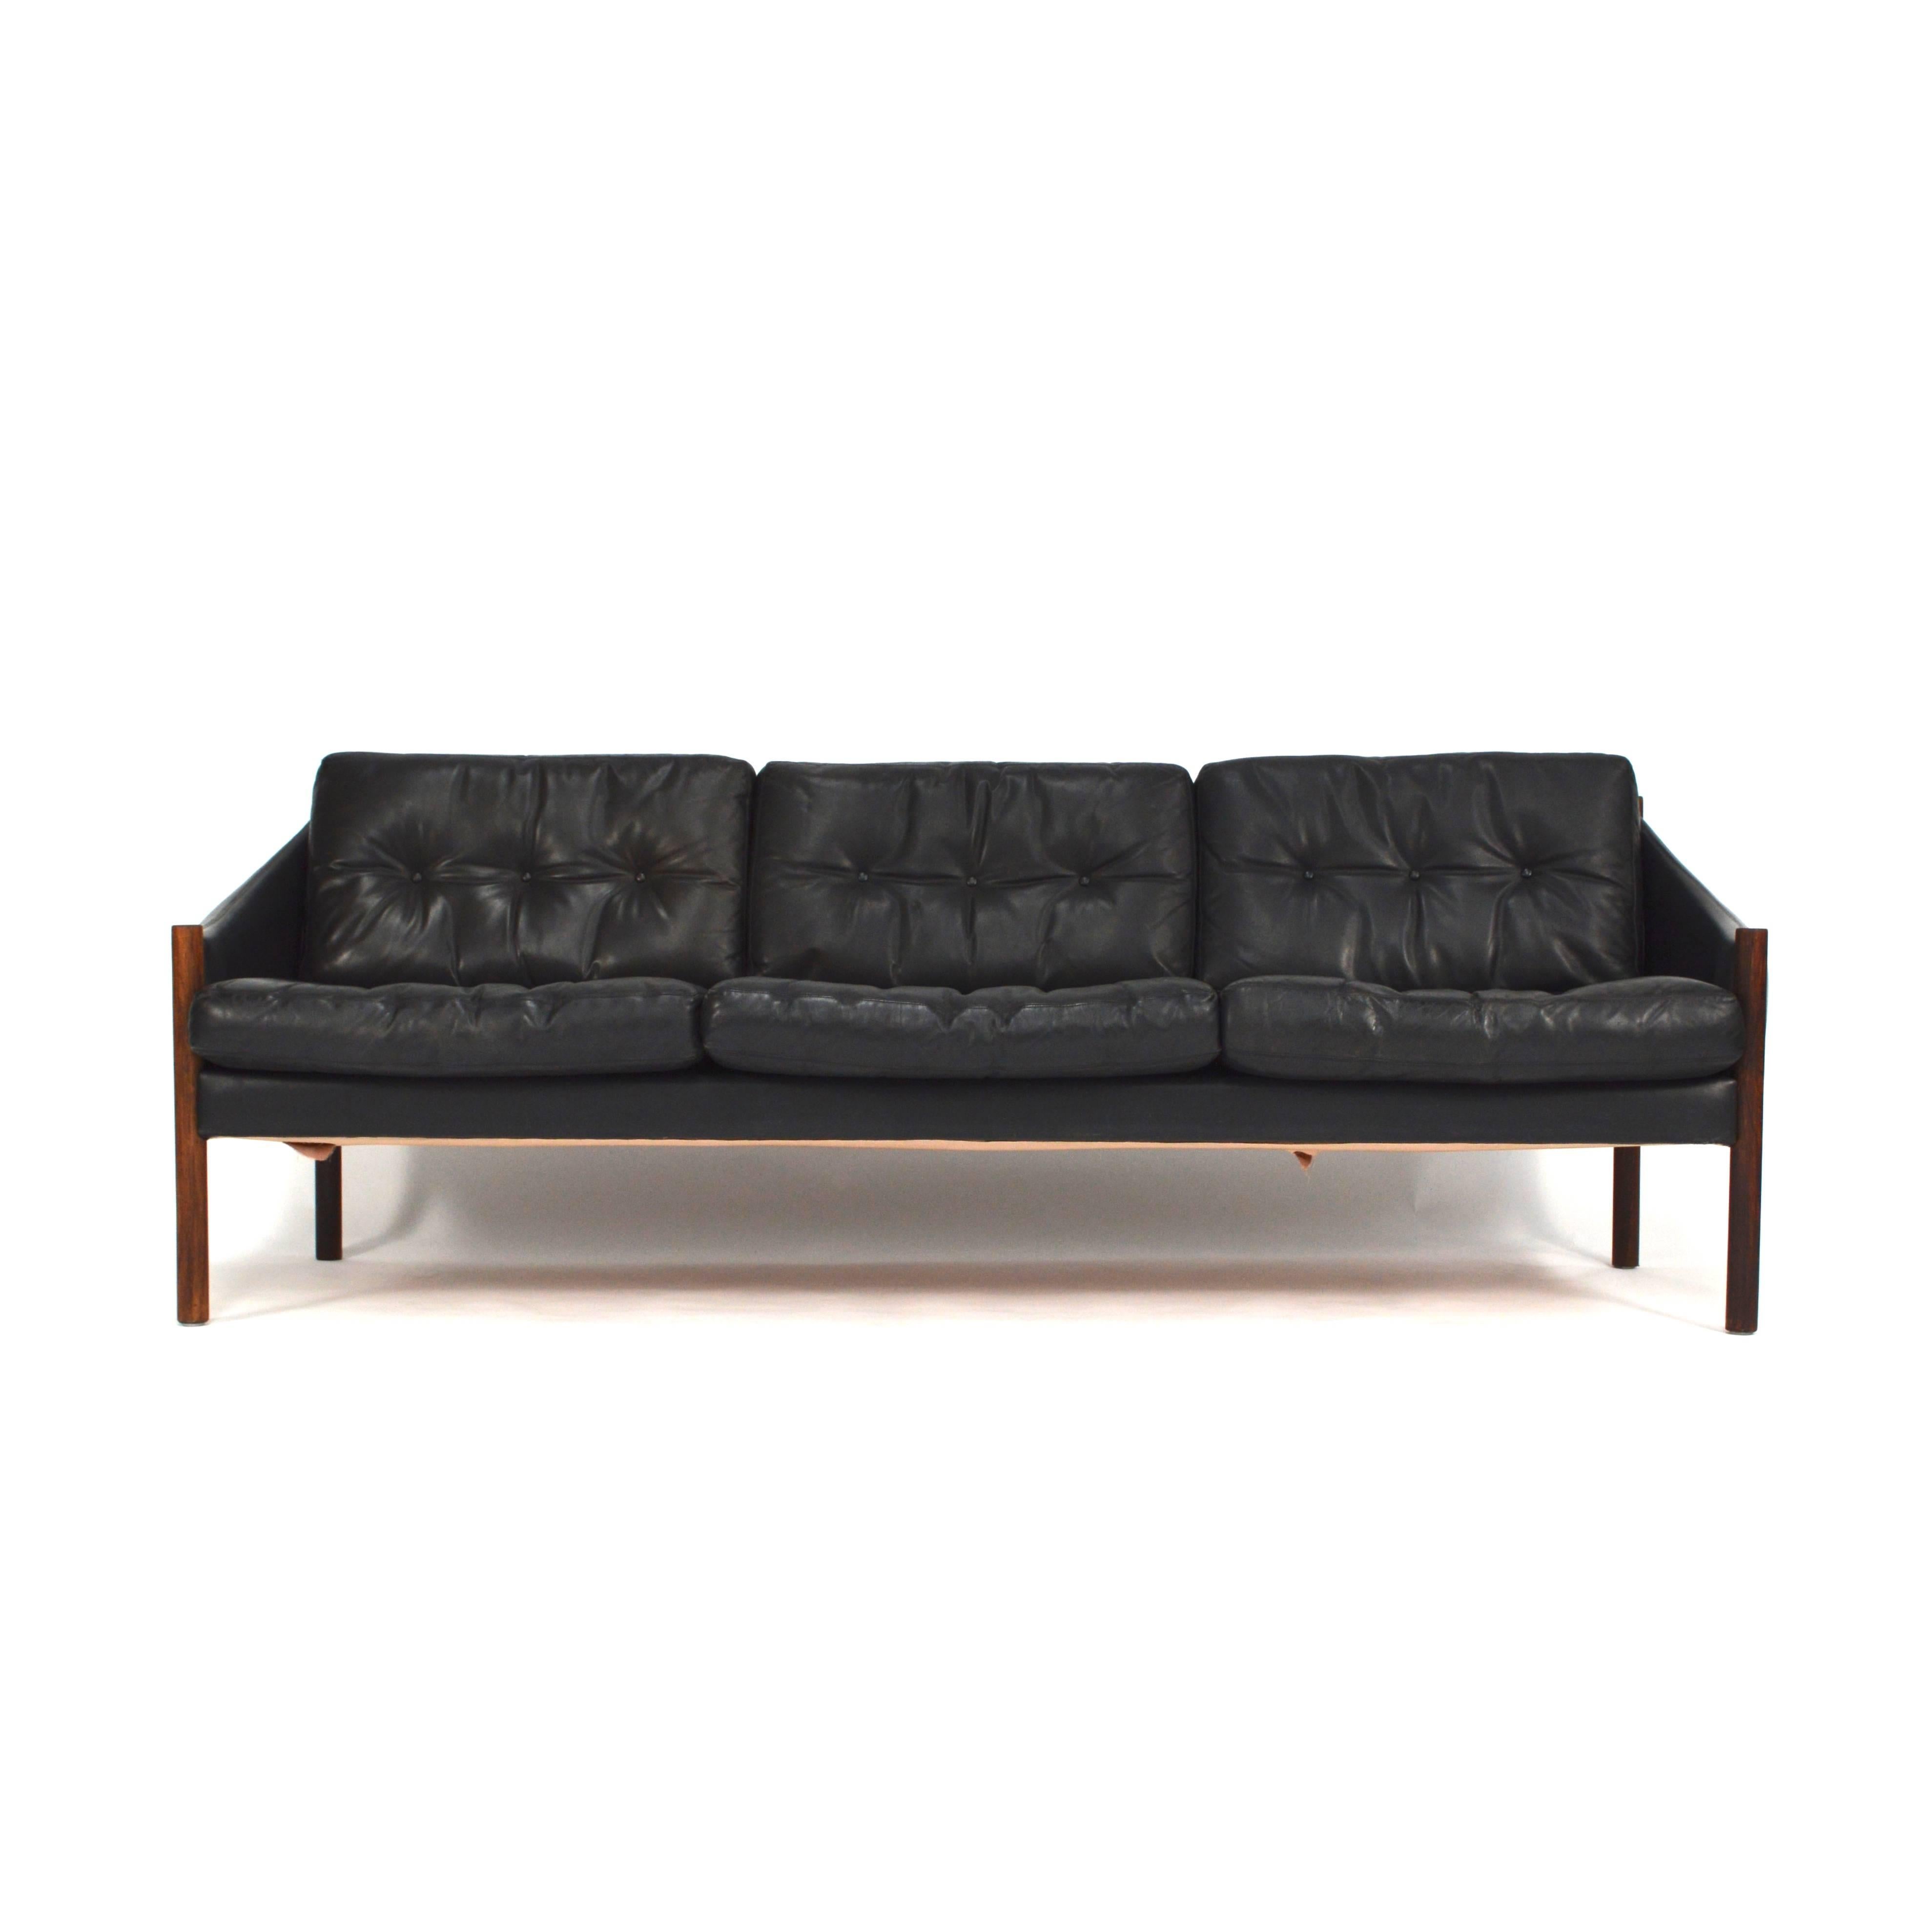 Beautiful and very comfortable three-seat sofa attributed to Arne Norell from the 1960s.
The black leather is still in very good condition with some nice signs of age and use.
The legs are made of solid rosewood.
The armrests are curve